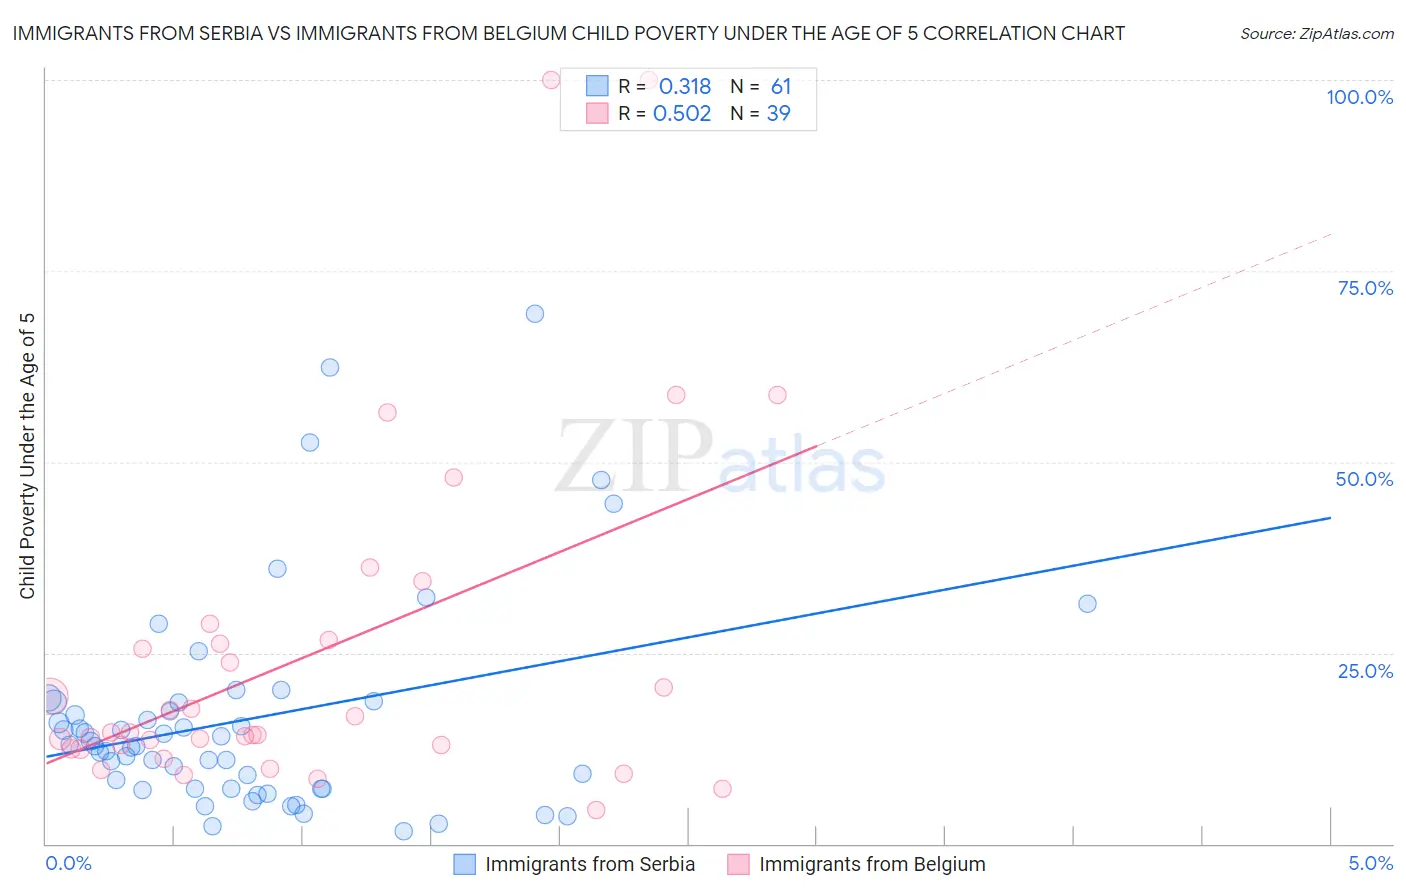 Immigrants from Serbia vs Immigrants from Belgium Child Poverty Under the Age of 5